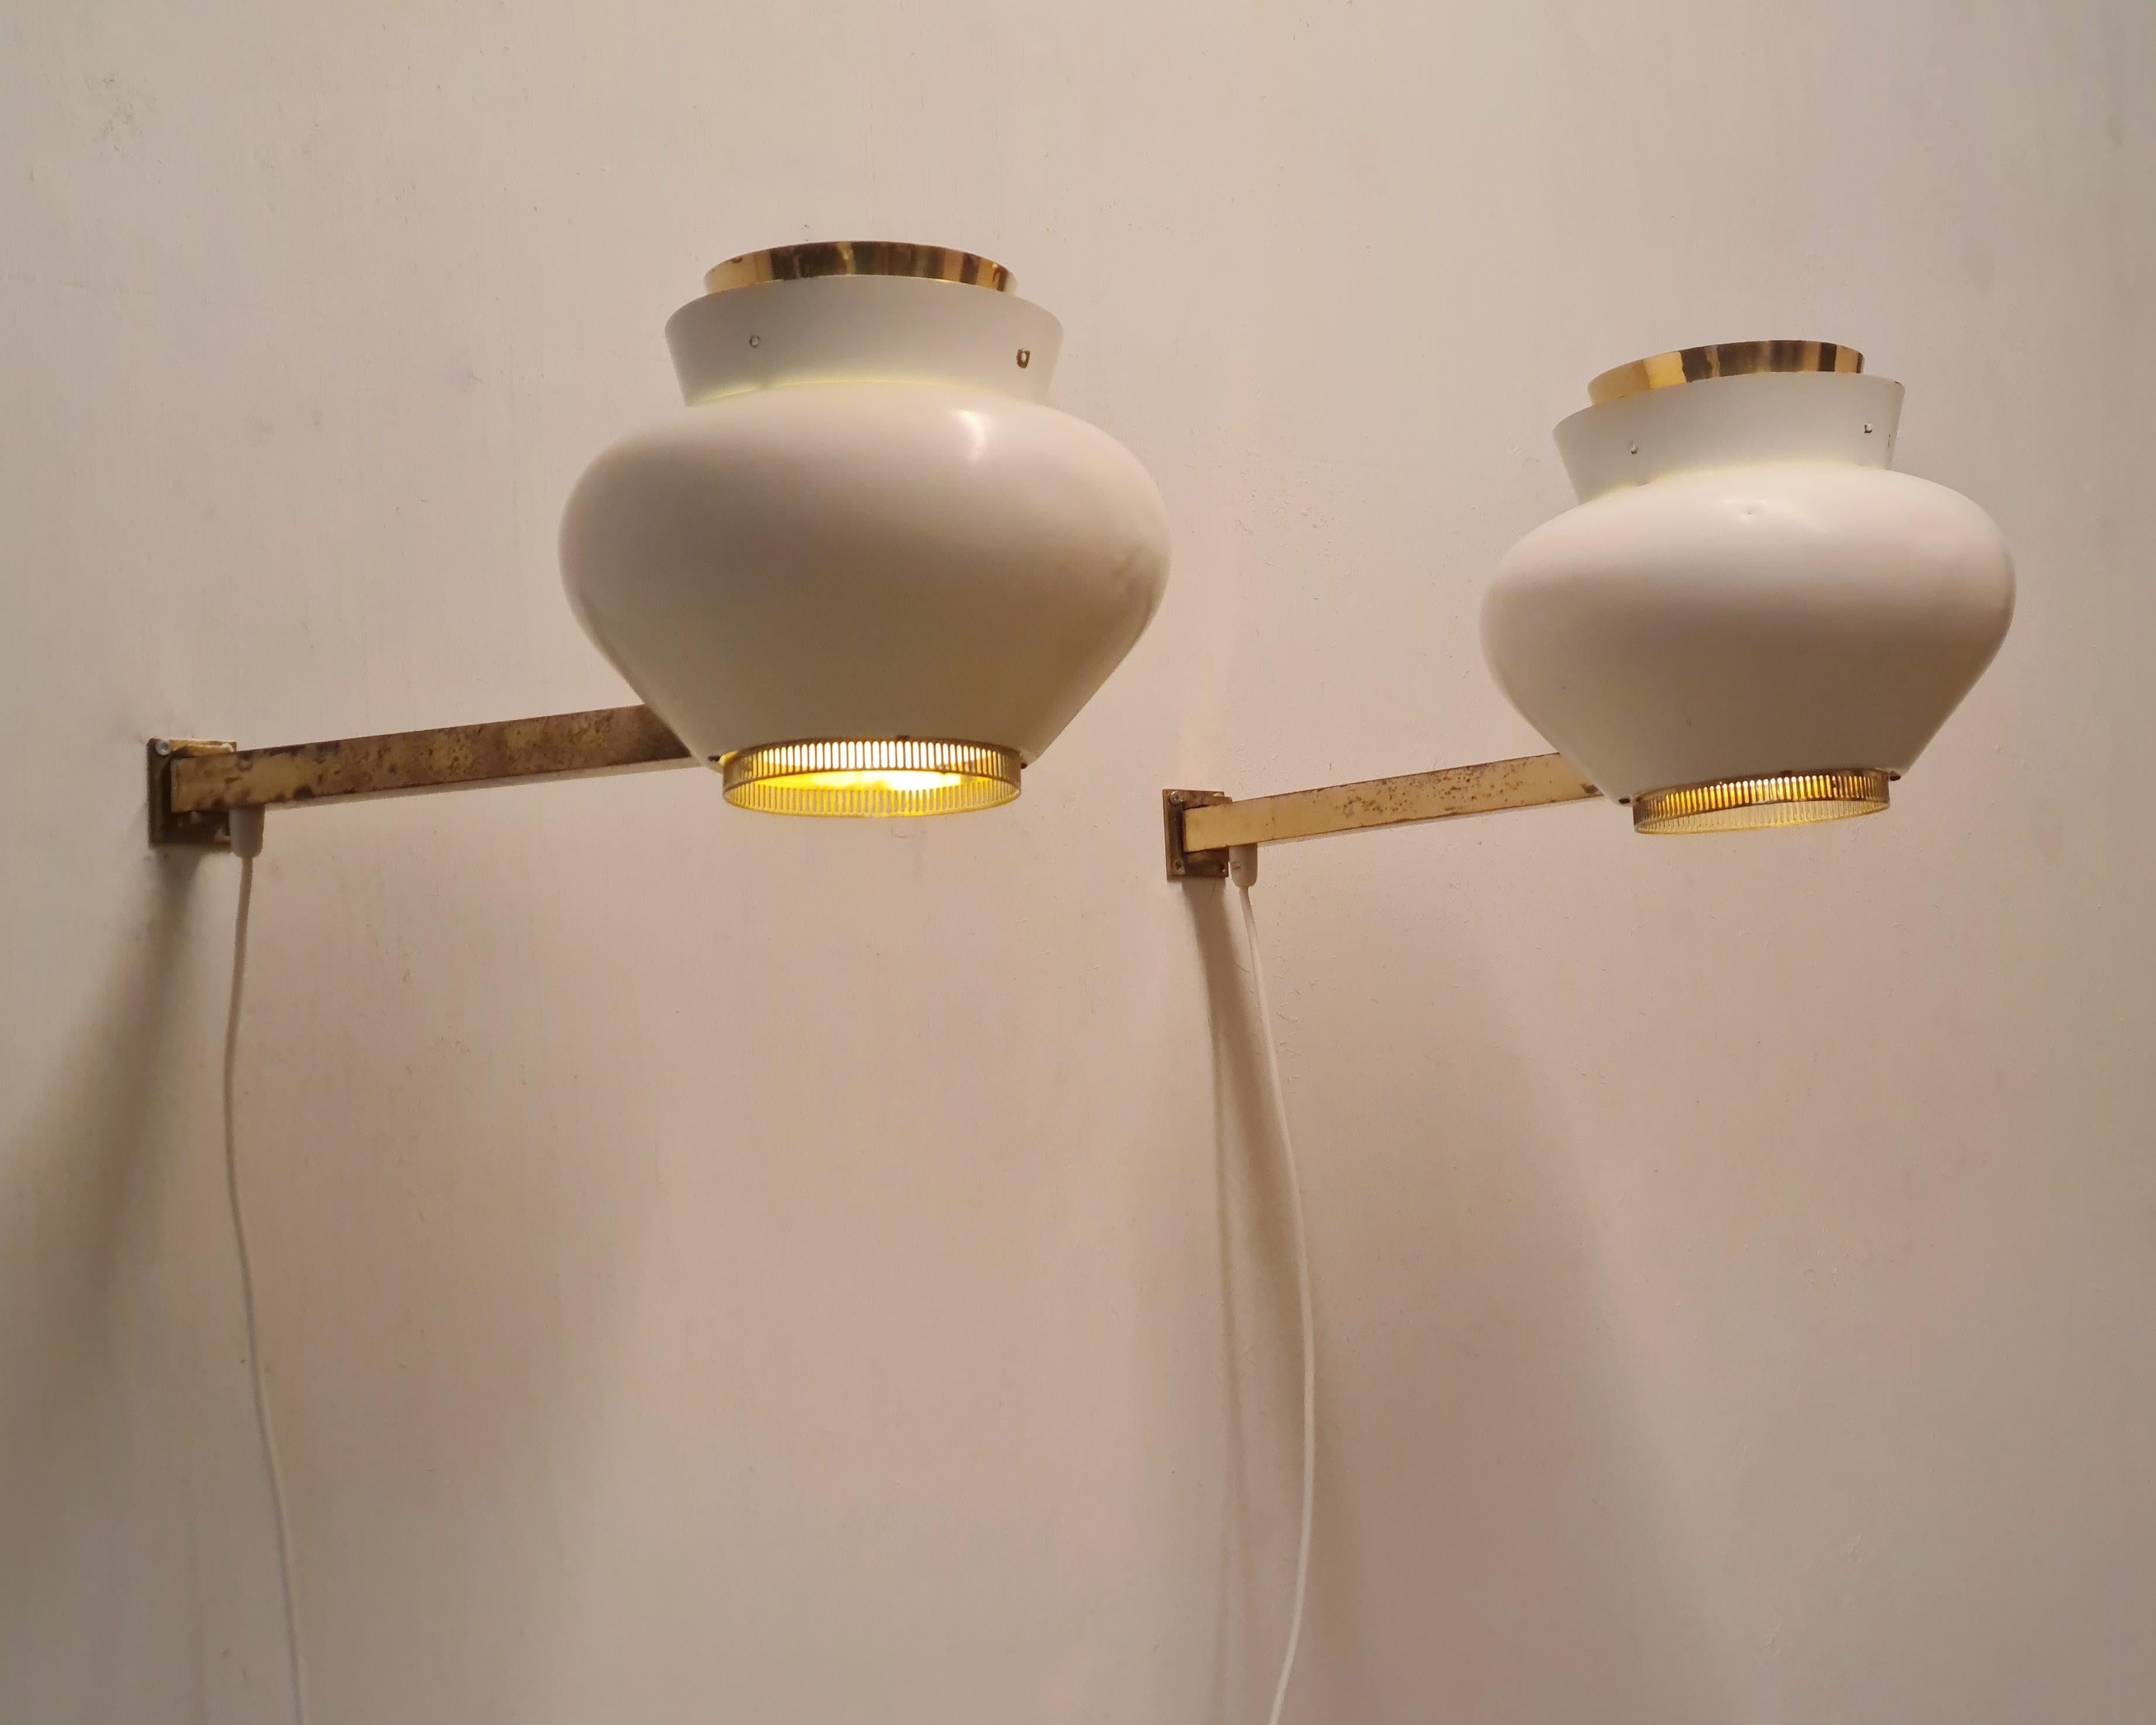 A Pair of Alvar Aalto Commissioned Wall Lamps, Valaistustyö 1950s For Sale 10